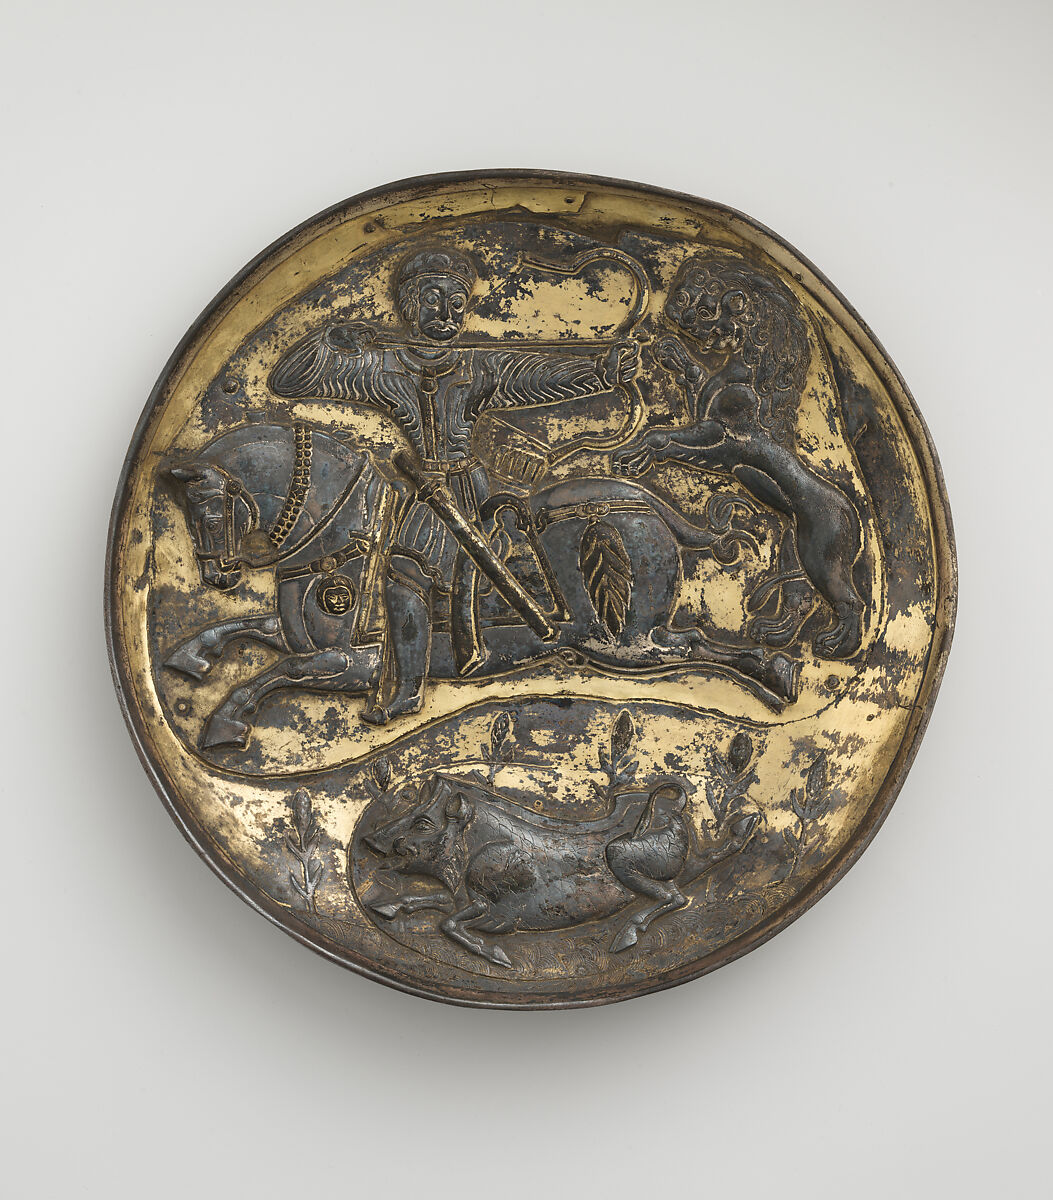 Reproduction of a plate with hunting scene, Electrotype 